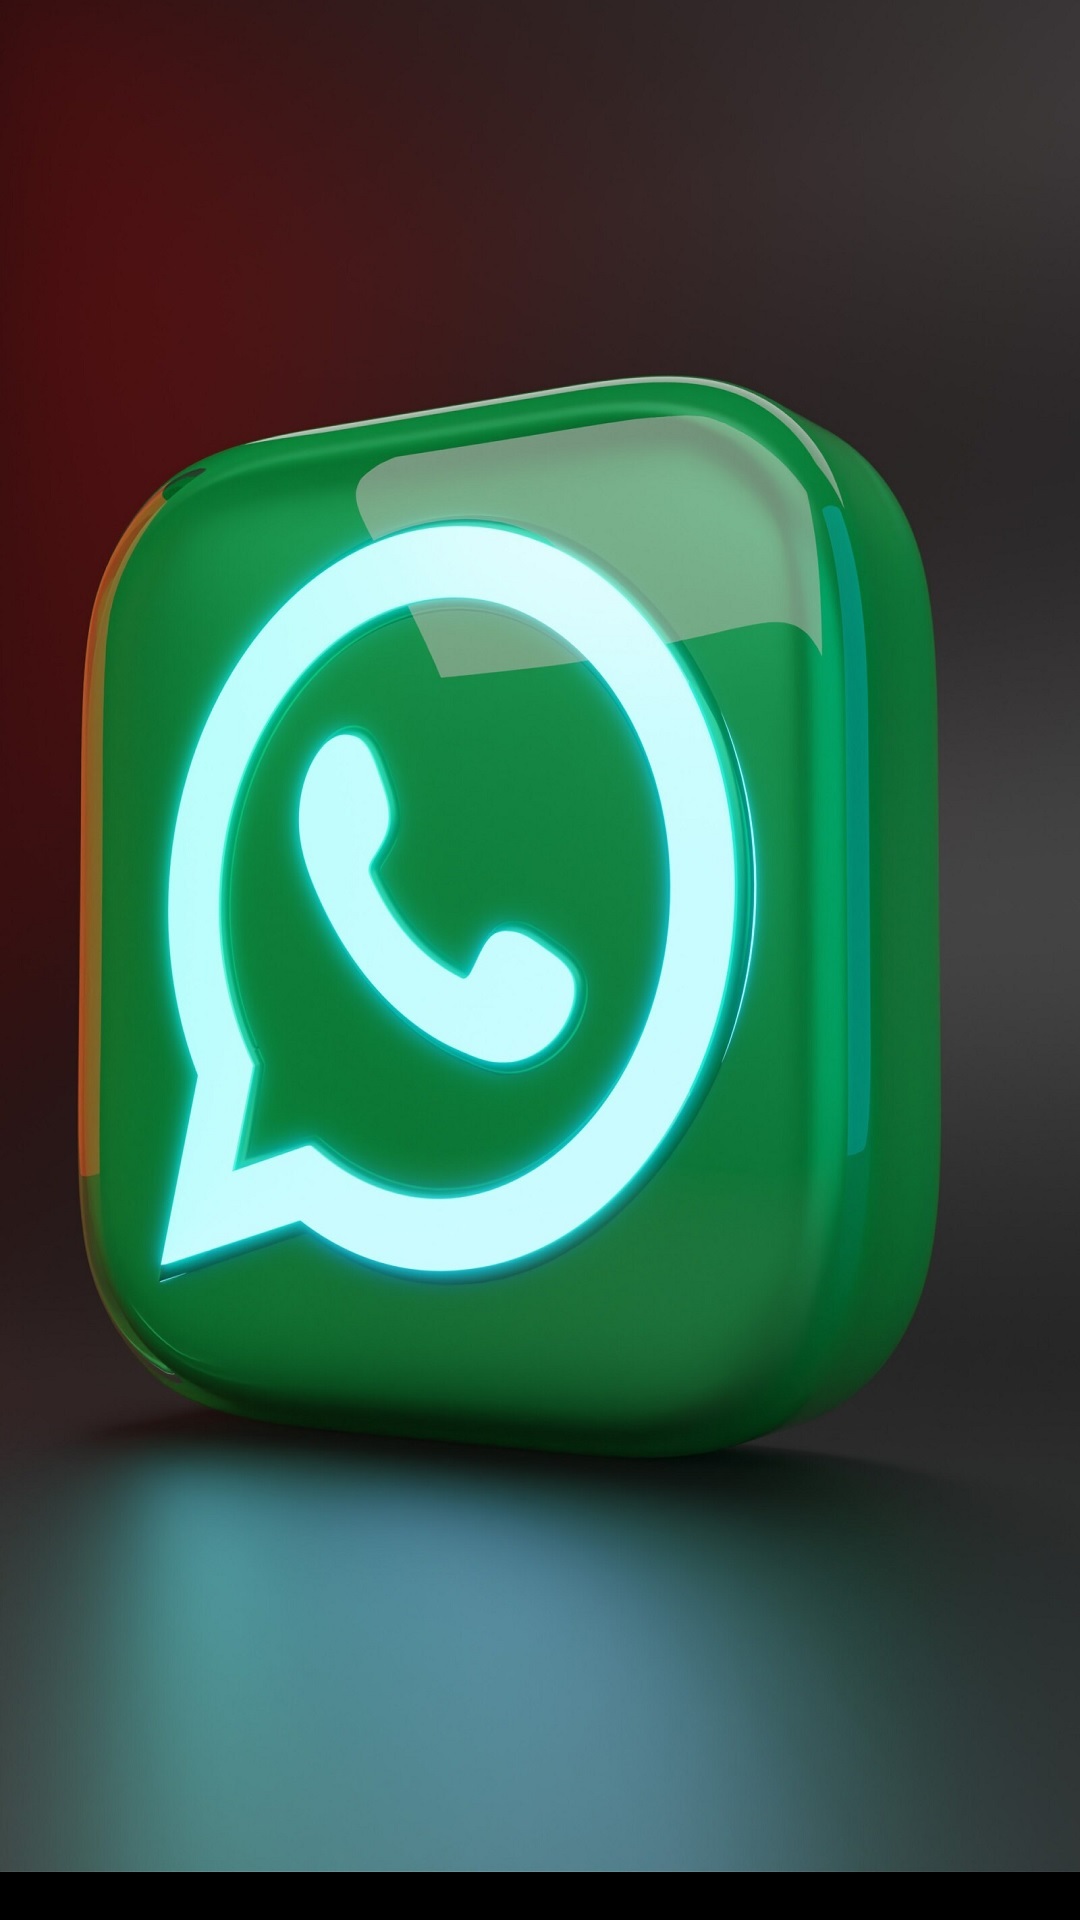 Quick guide to chat on WhatsApp without saving contacts
